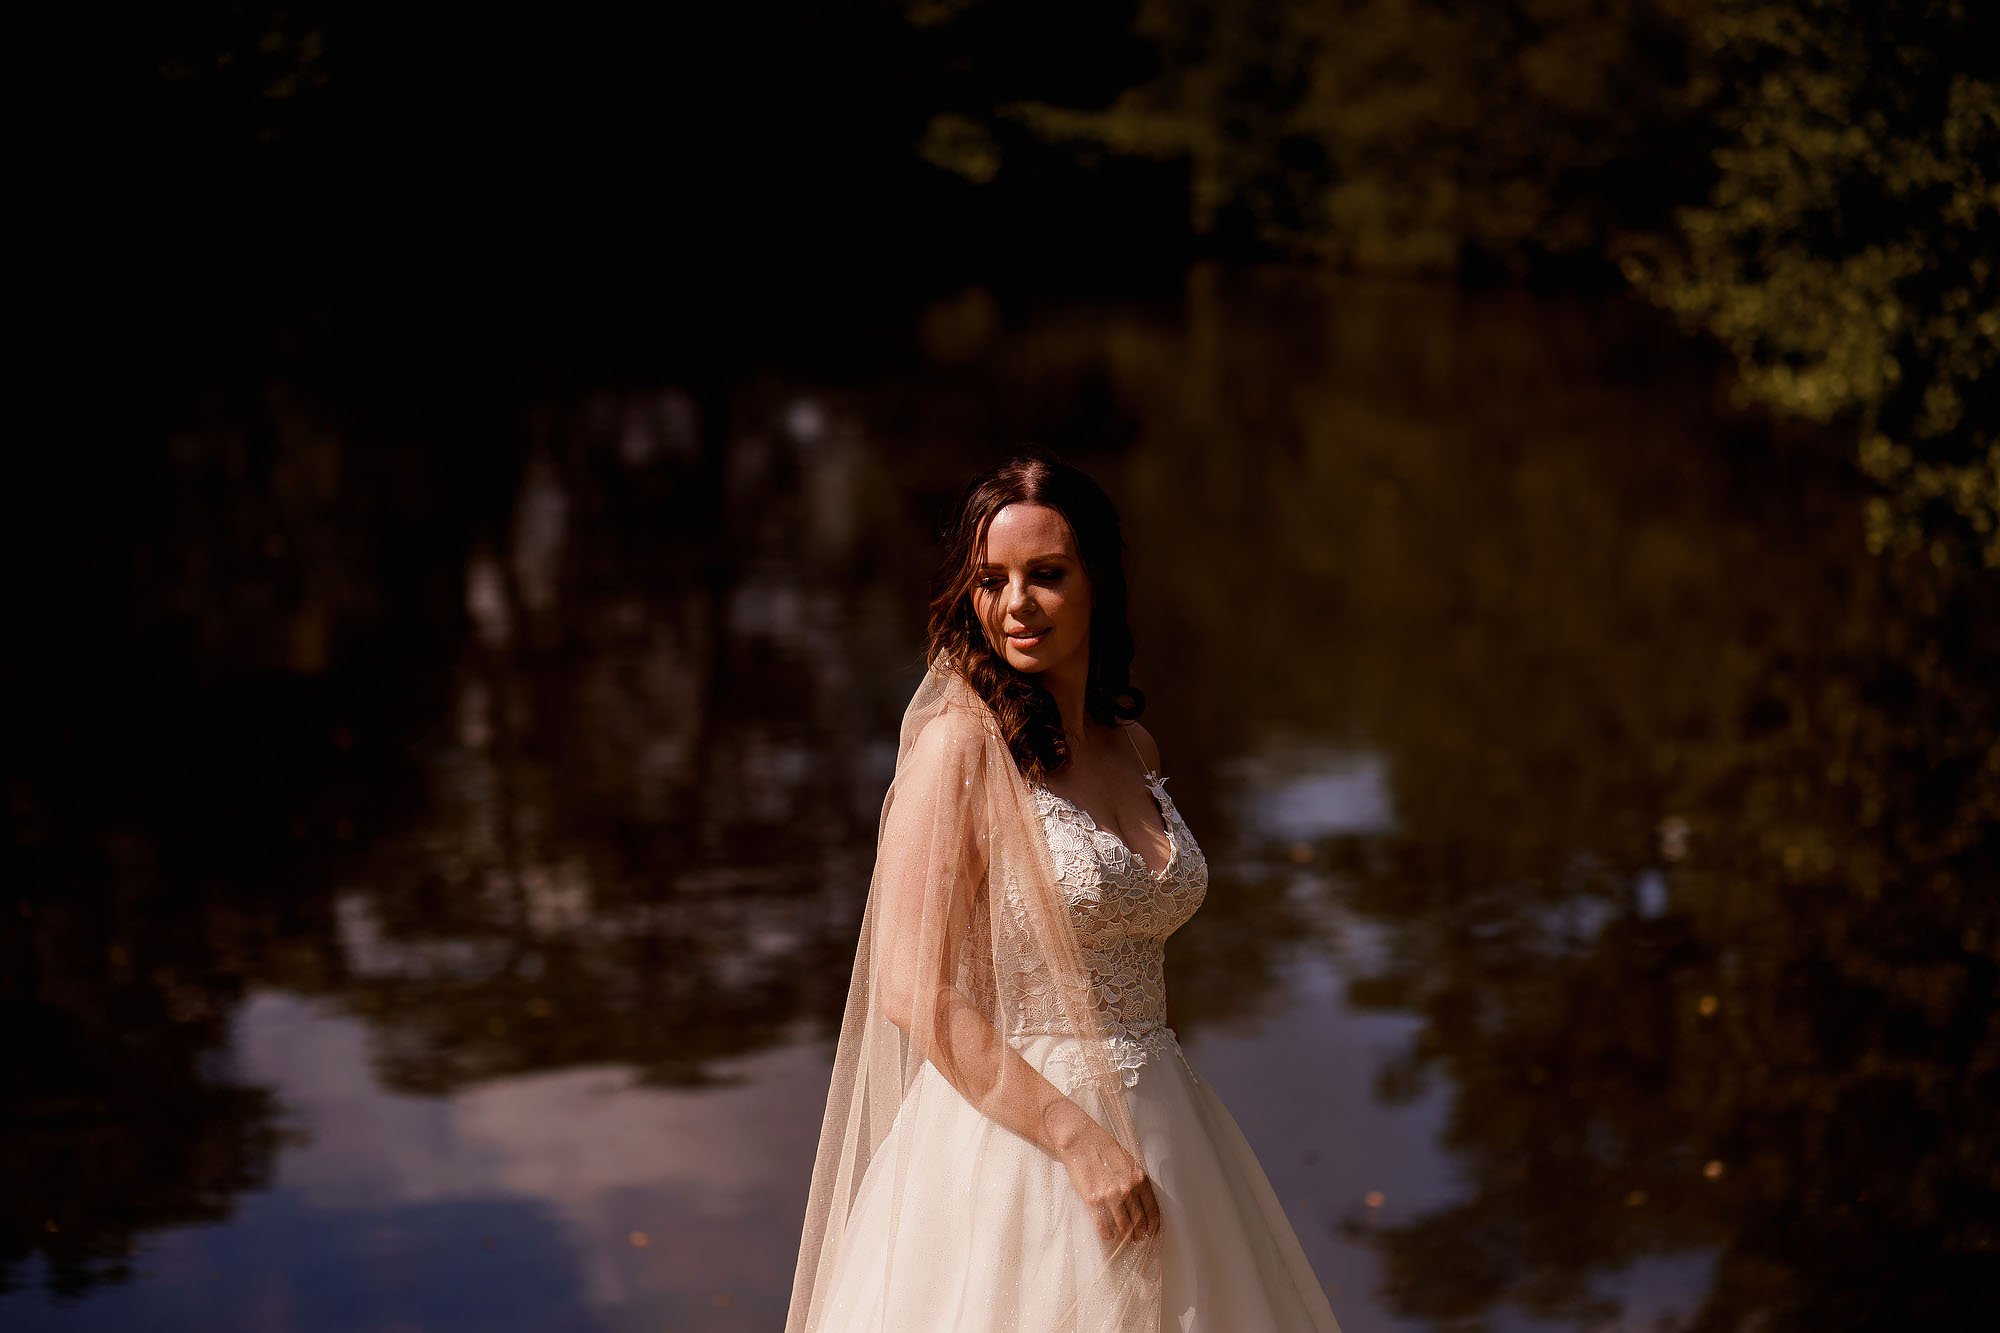 Cheshire wedding at styal lodge - cheshire wedding photography by arj photography®